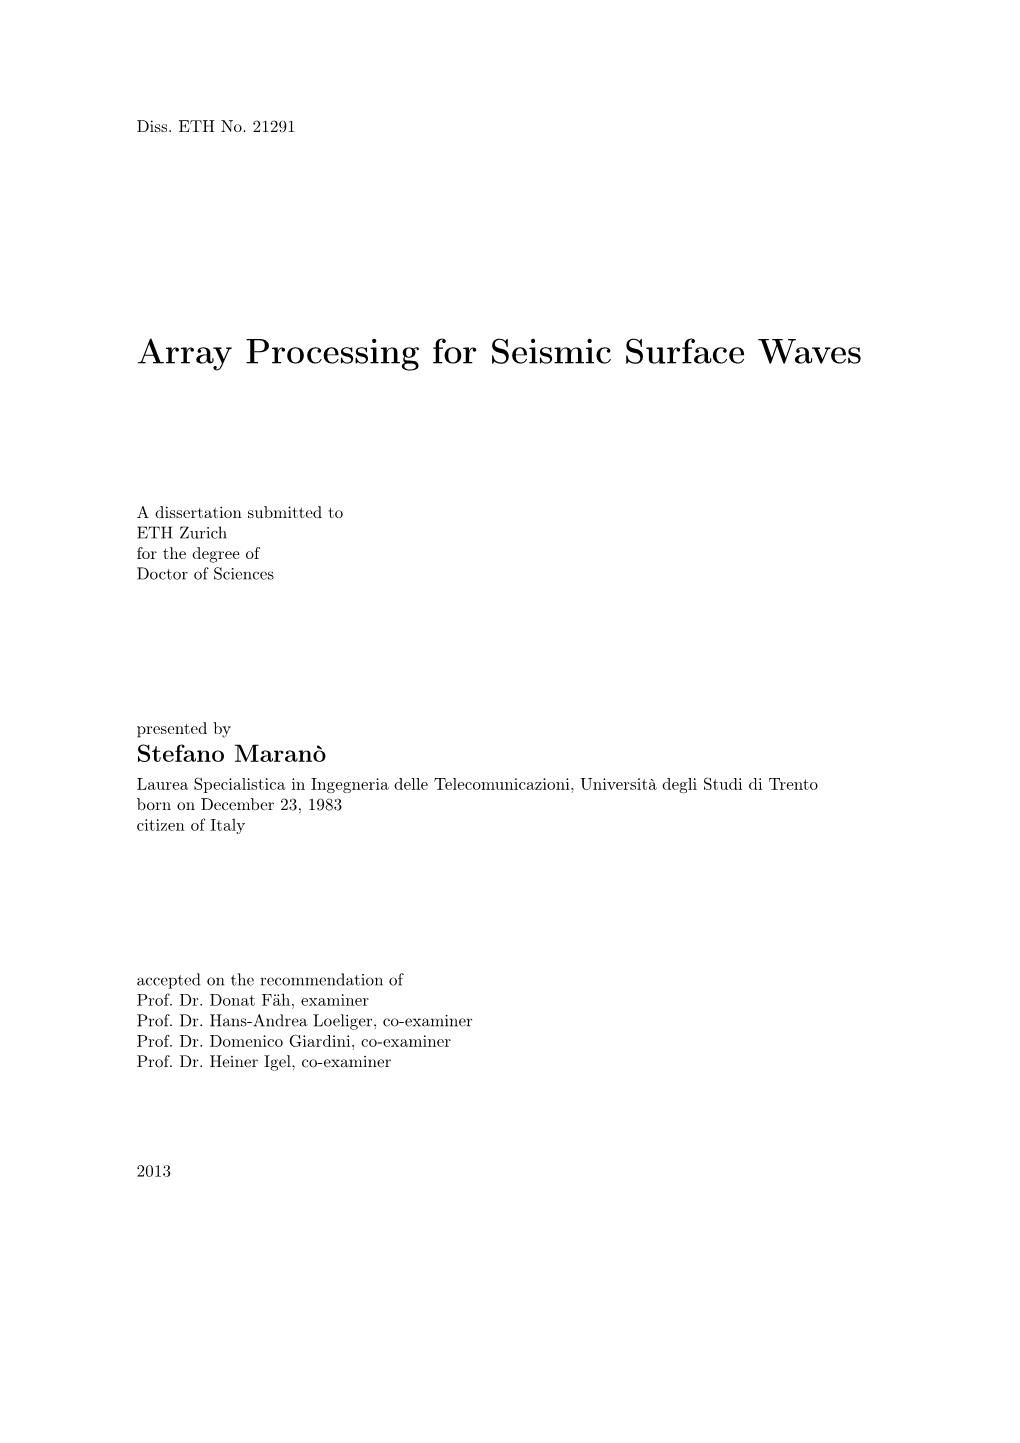 Array Processing for Seismic Surface Waves